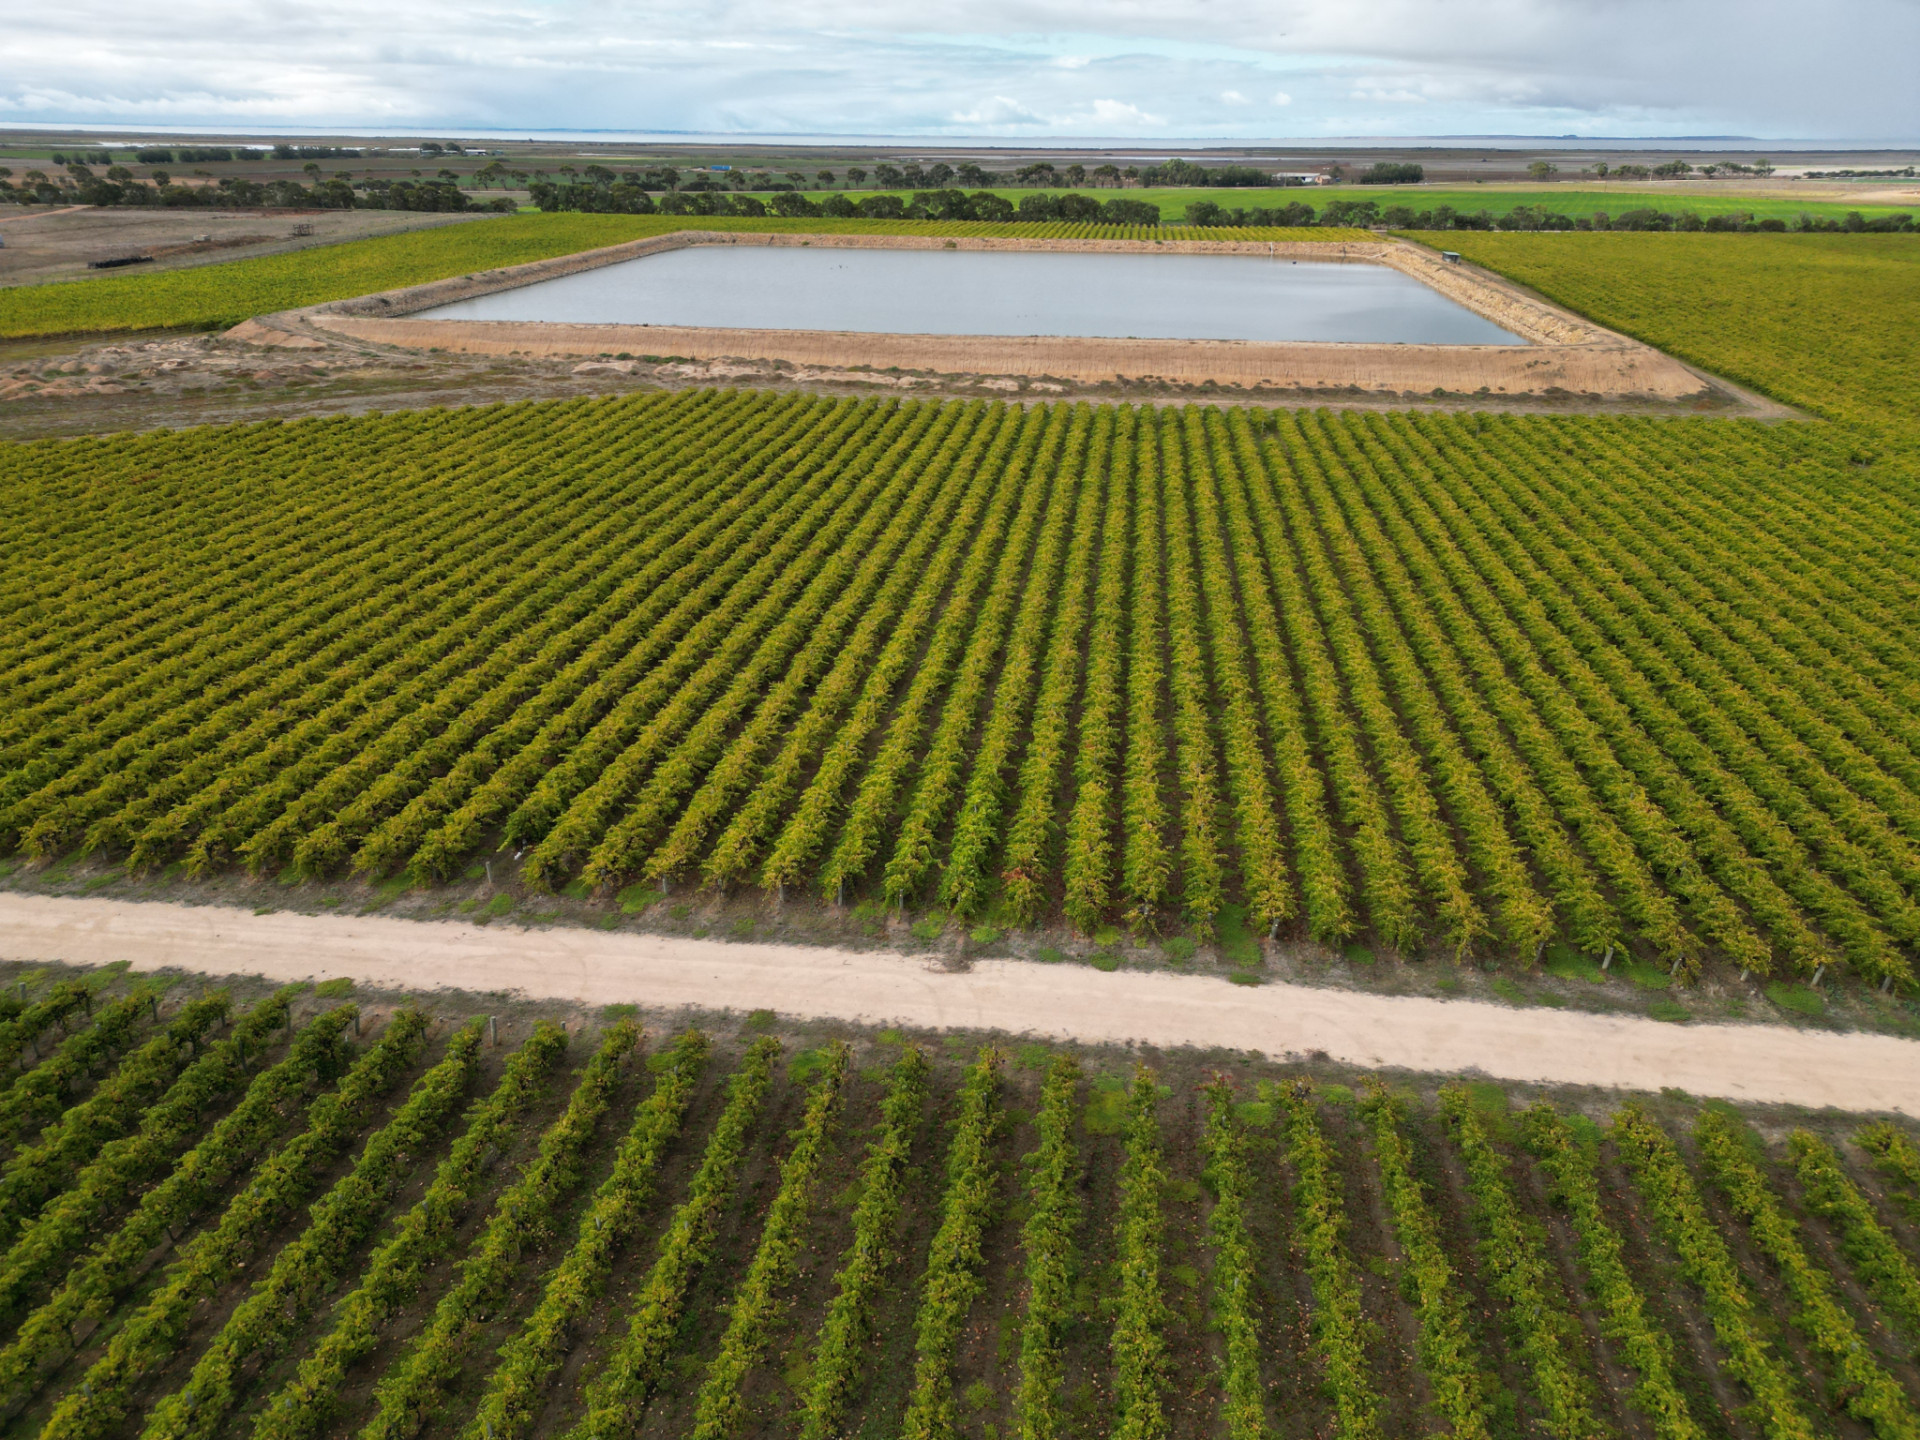 A field with rows of plants and a large, rectangular reservoir of water.